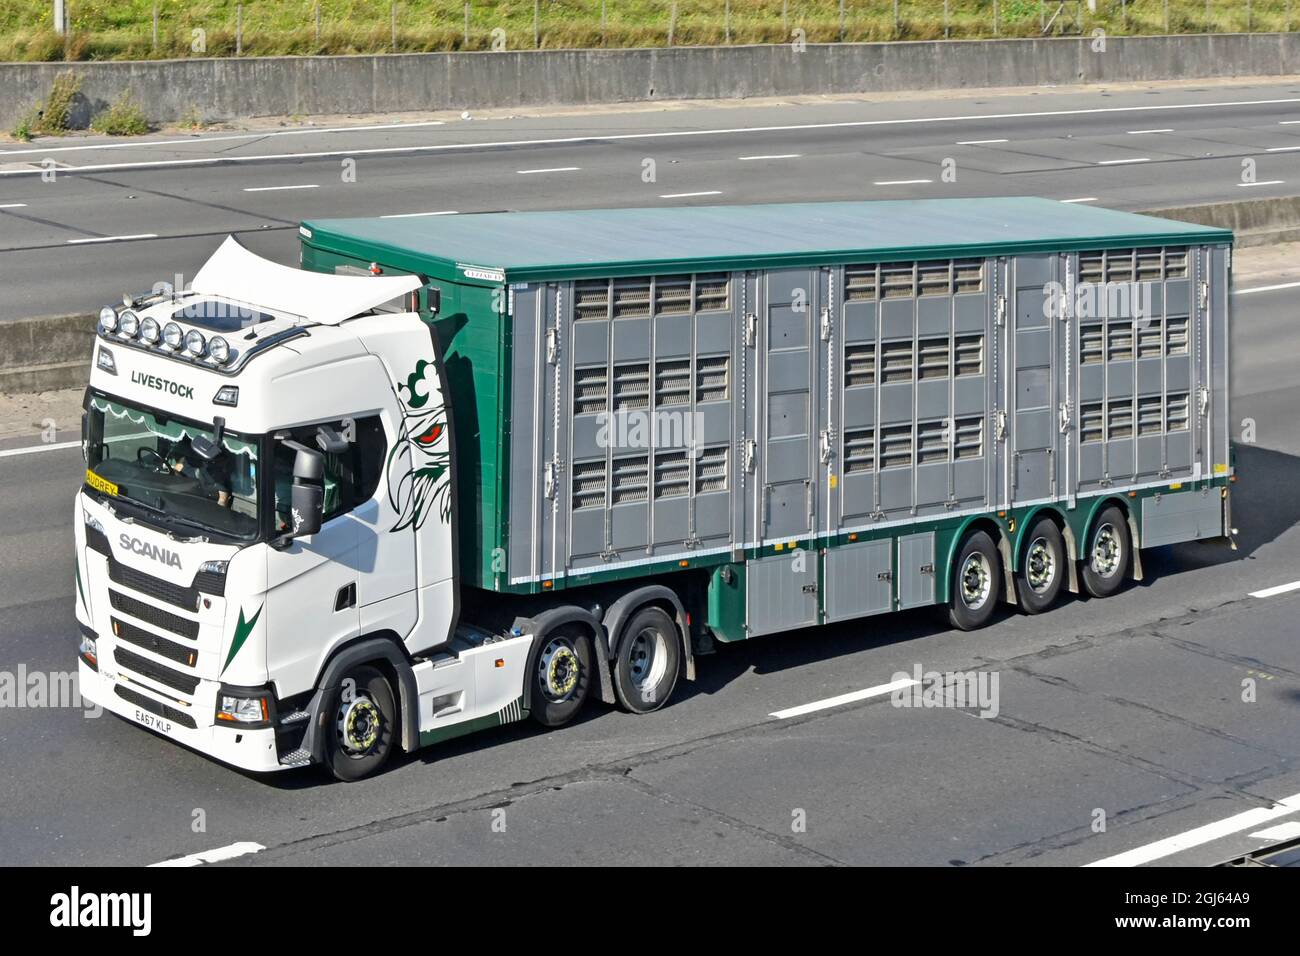 Driver front & side view livestock sign on cab white Scania lorry truck towing ventilated articulated trailer animal cattle transport on UK motorway Stock Photo